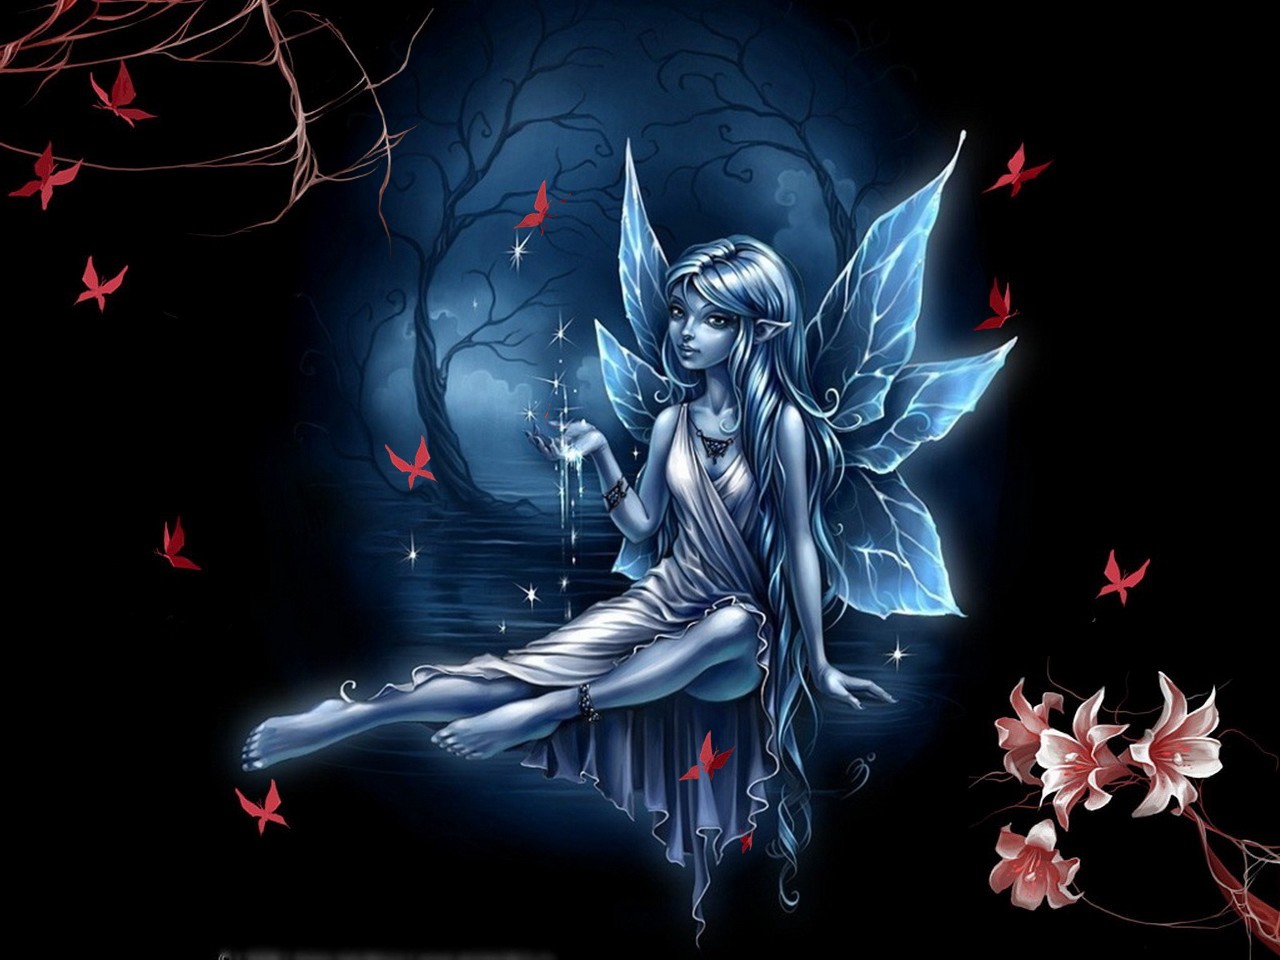 Fairy HD Wallpapers Fairy HD Wallpapers Check out the cool latest 1280x960